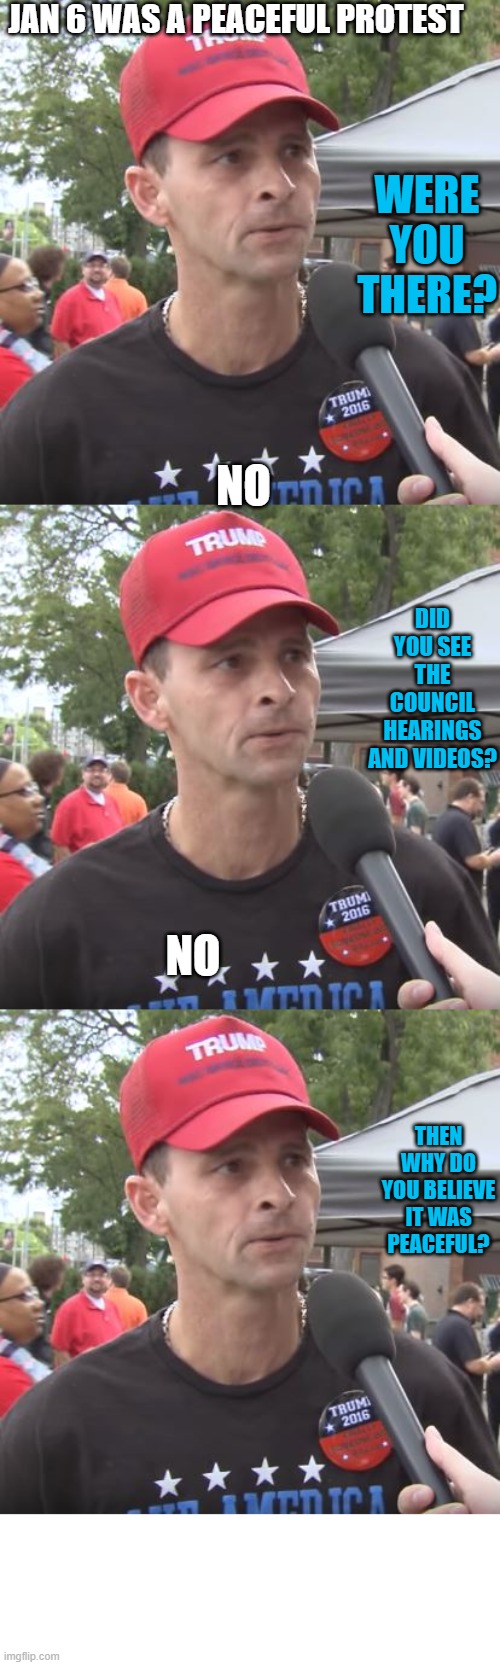 JAN 6 WAS A PEACEFUL PROTEST WERE YOU THERE? NO DID YOU SEE THE COUNCIL HEARINGS AND VIDEOS? NO THEN WHY DO YOU BELIEVE IT WAS PEACEFUL? | image tagged in trump supporter | made w/ Imgflip meme maker